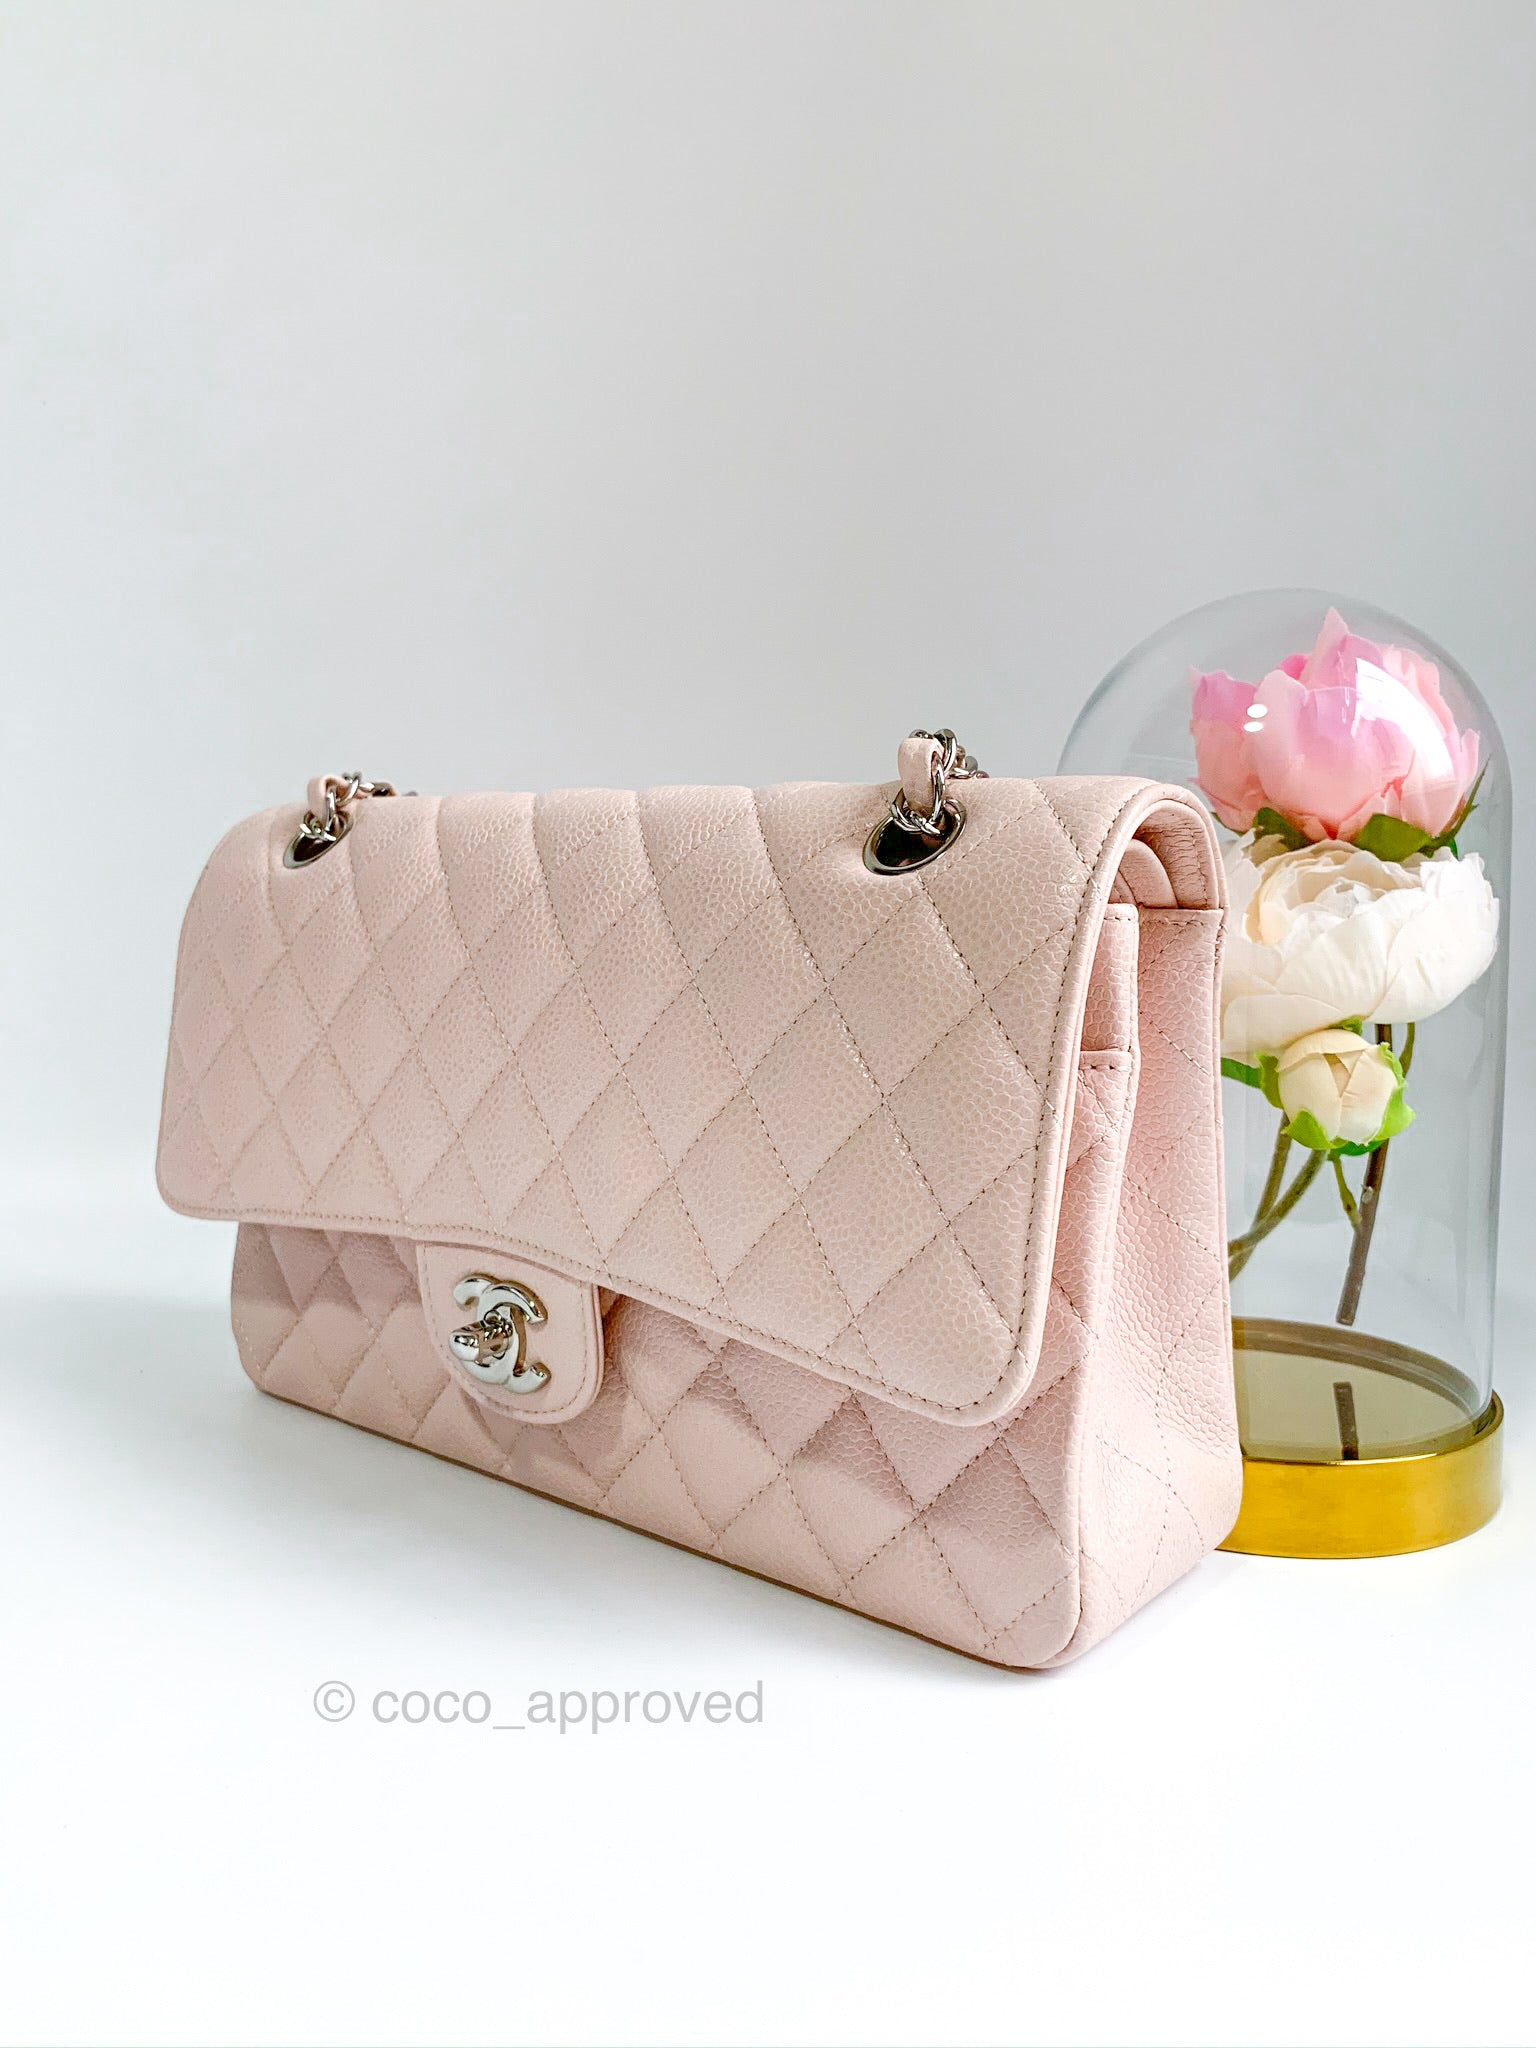 MY UNICORN BAG 🦄 CHANEL SQUARE MINI IN SAKURA PINK 🌸 - REVIEW, WHAT FITS  INSIDE & HOW I GOT IT 